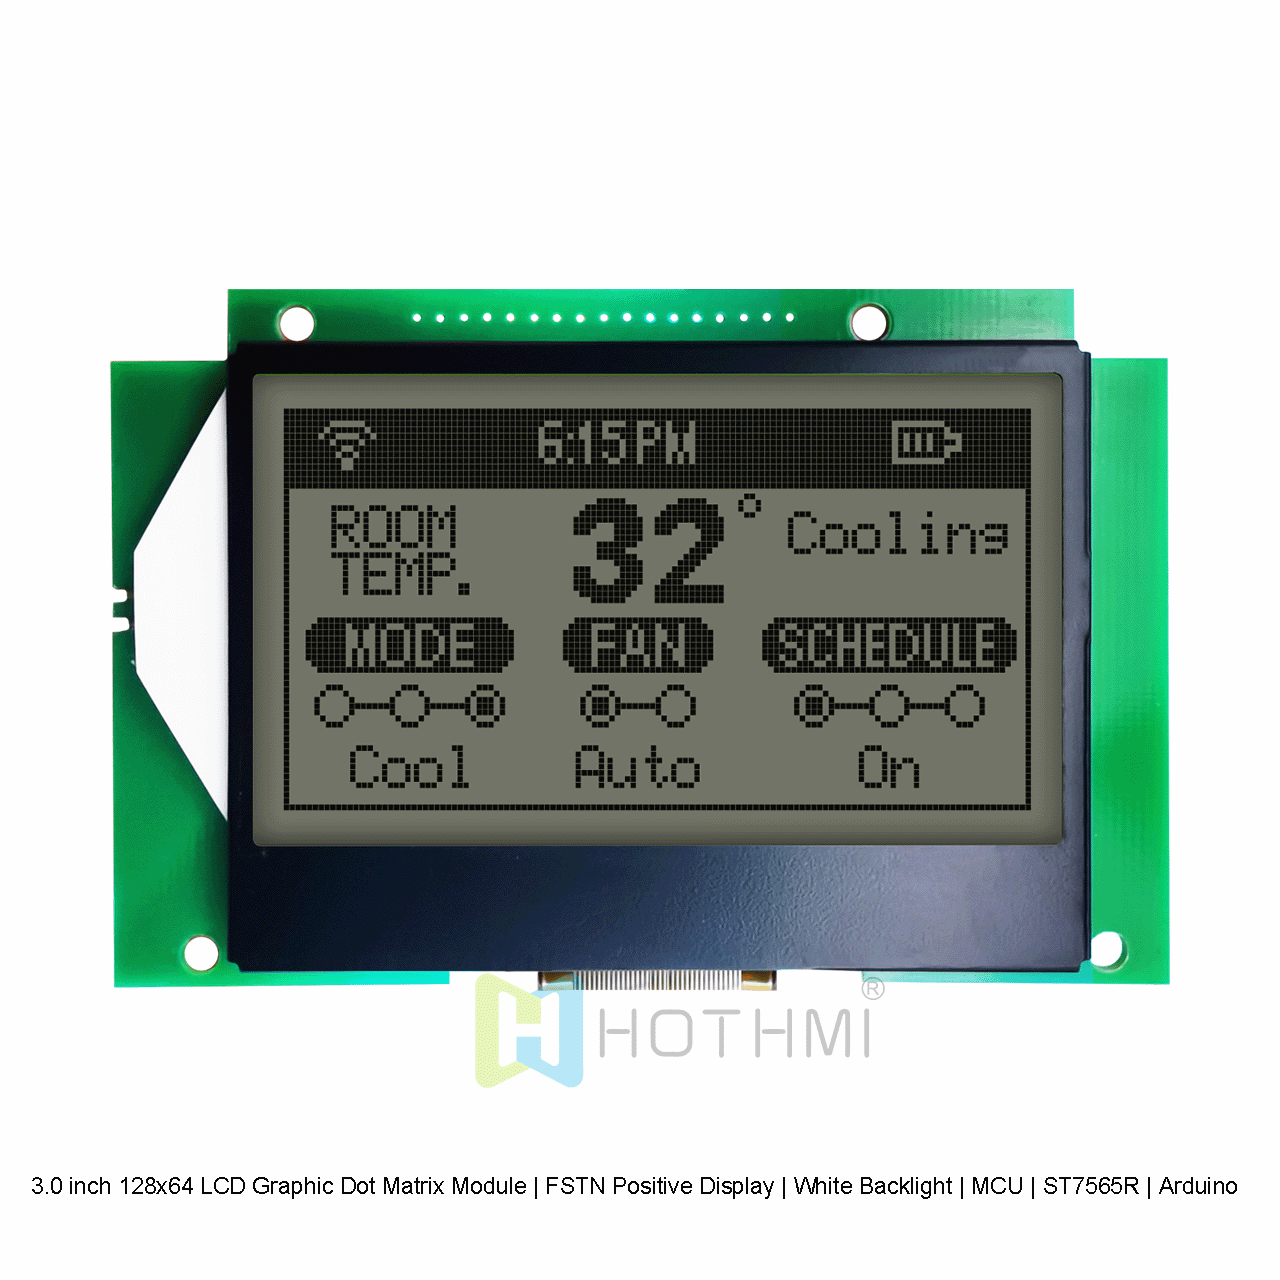 3.0 inch 128x64 LCD Graphic Dot Matrix Module | FSTN Positive Display | White Backlight | MCU | ST7565R | Arduino | Gray Text on White Background